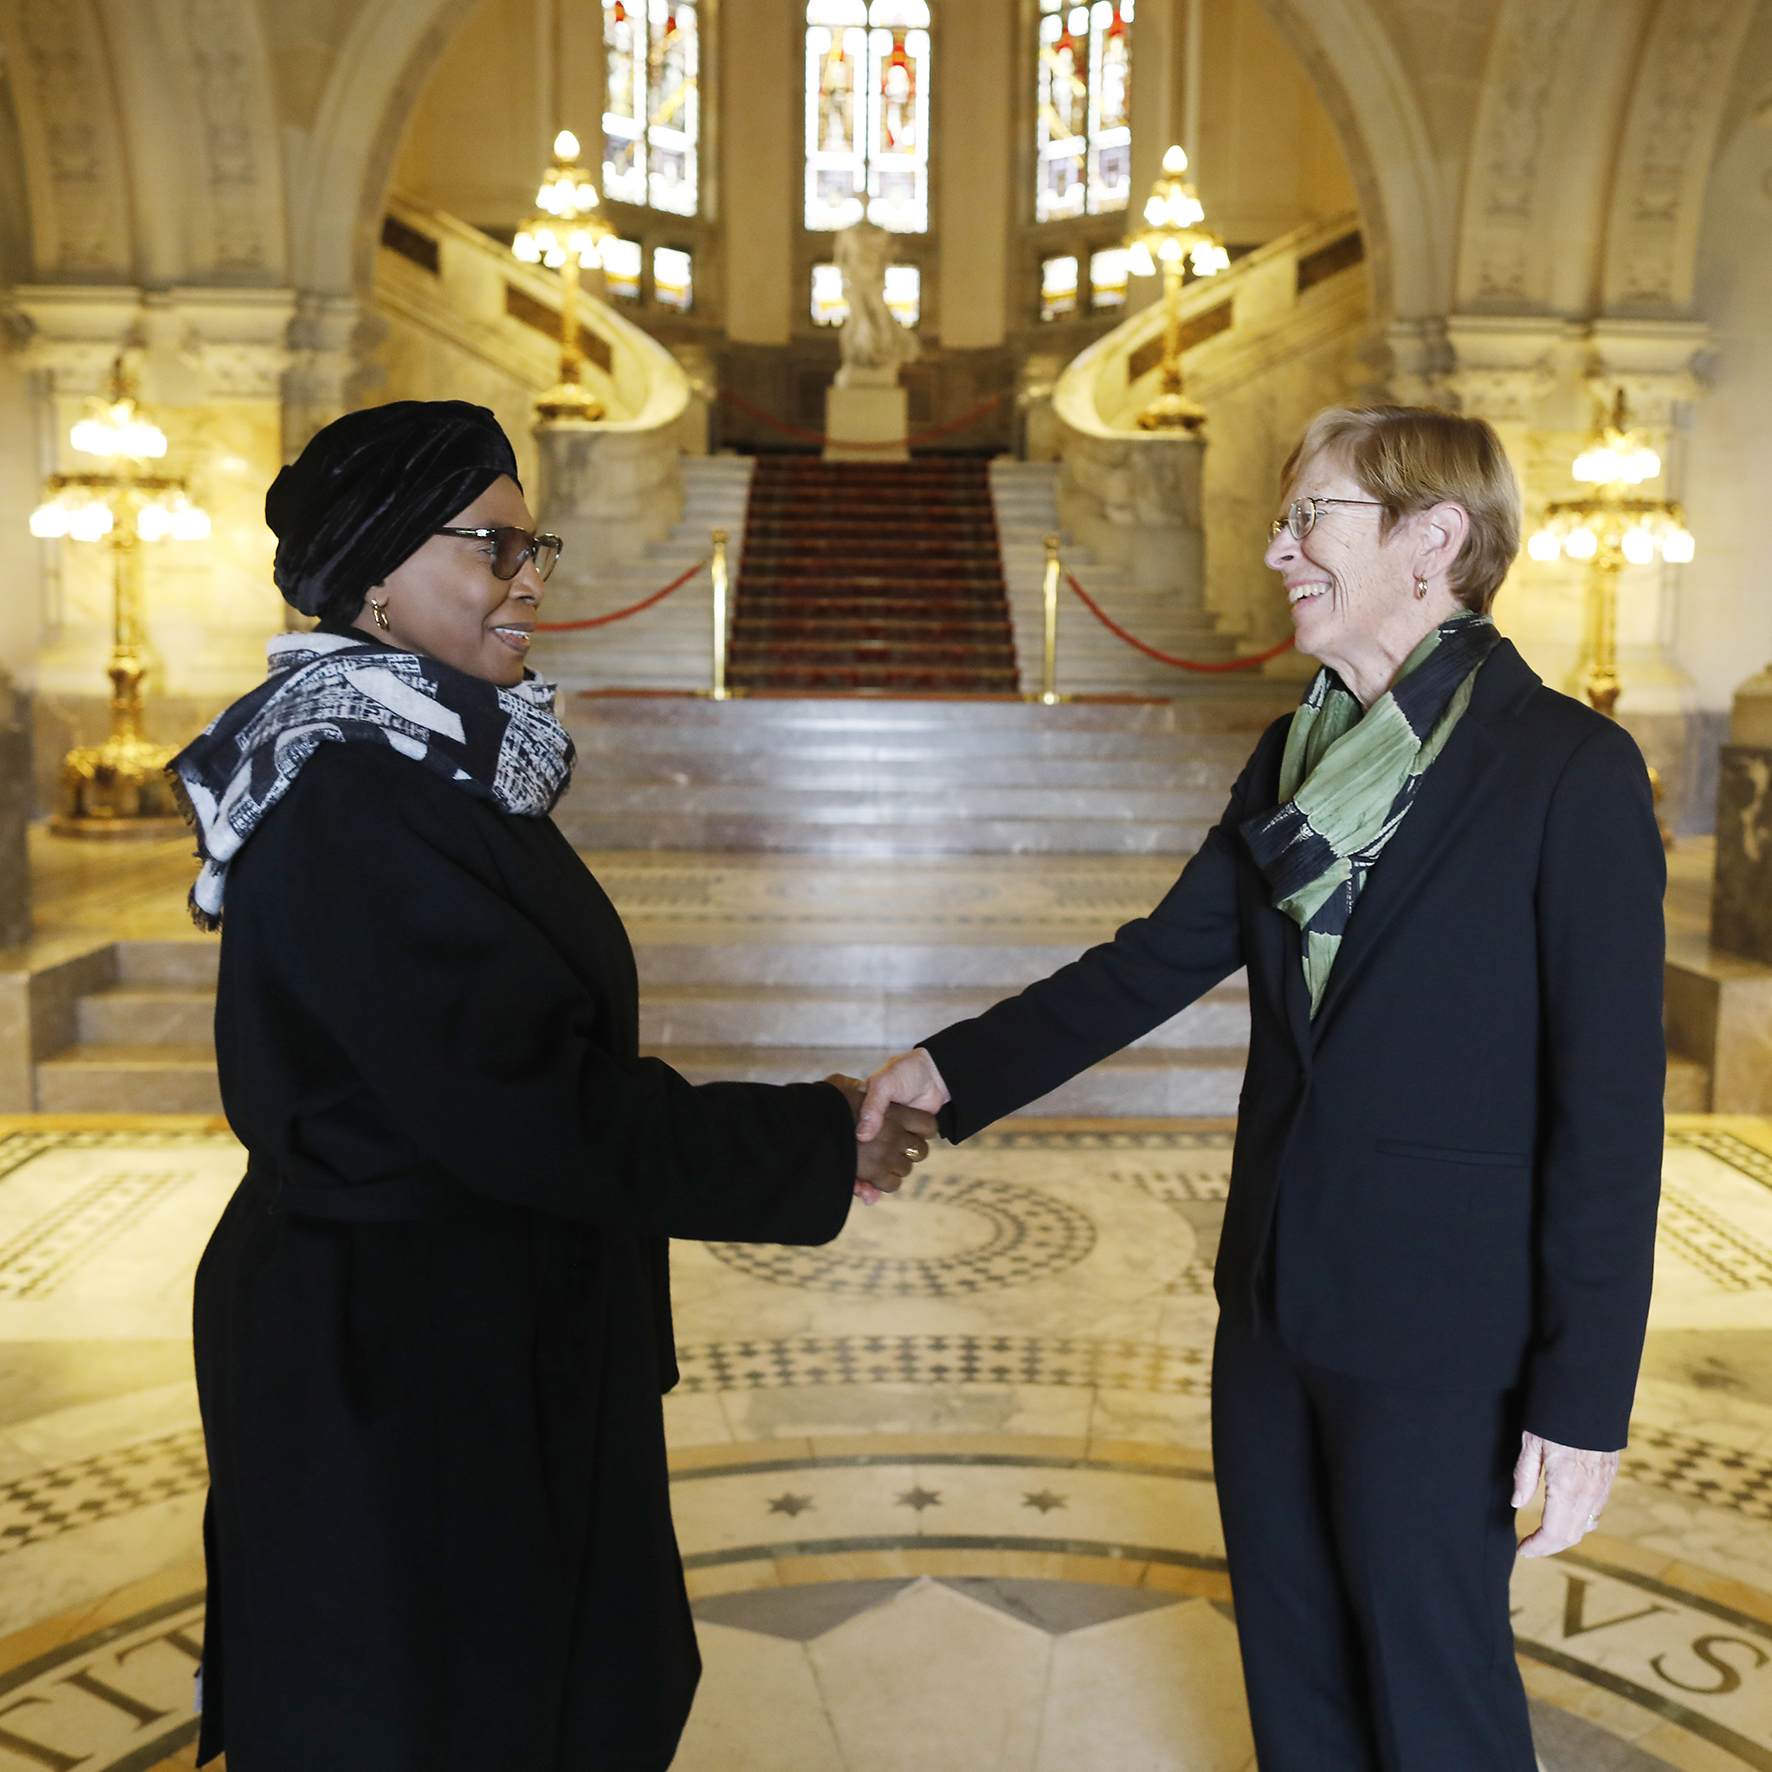 H.E. Judge Joan E. Donoghue, President of the International Court of Justice, greets H.E. Judge lmani D. Aboud, President of the African Court on Human and  Peoples’ Rights, and her delegation, in the entrance hall of the Peace Palace, seat of the Court